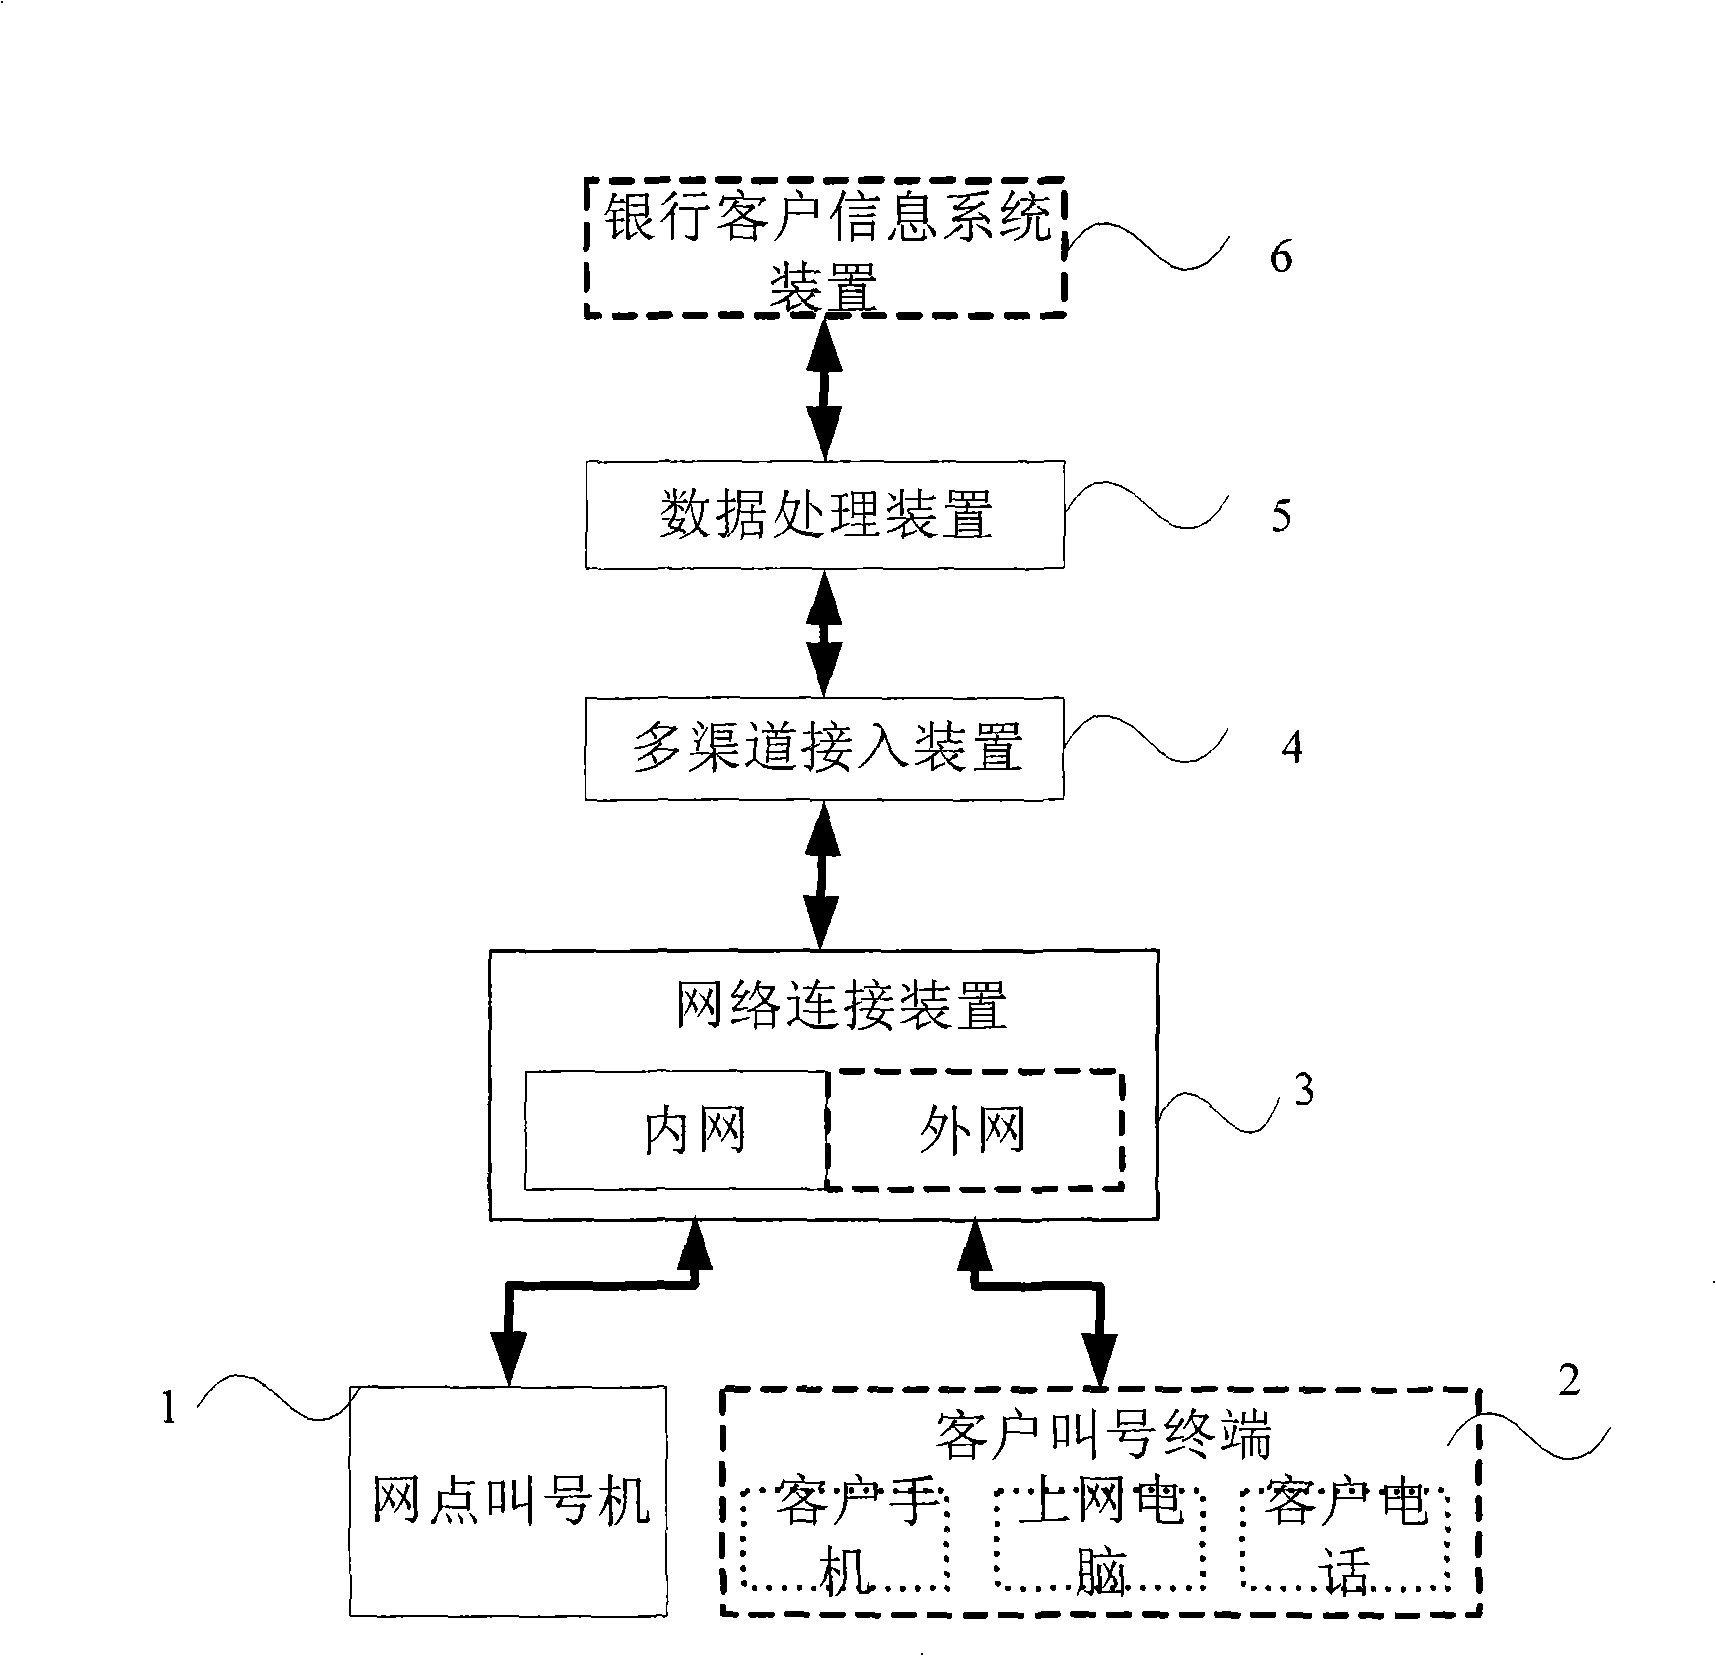 Bank queuing machine, system and method for processing queue